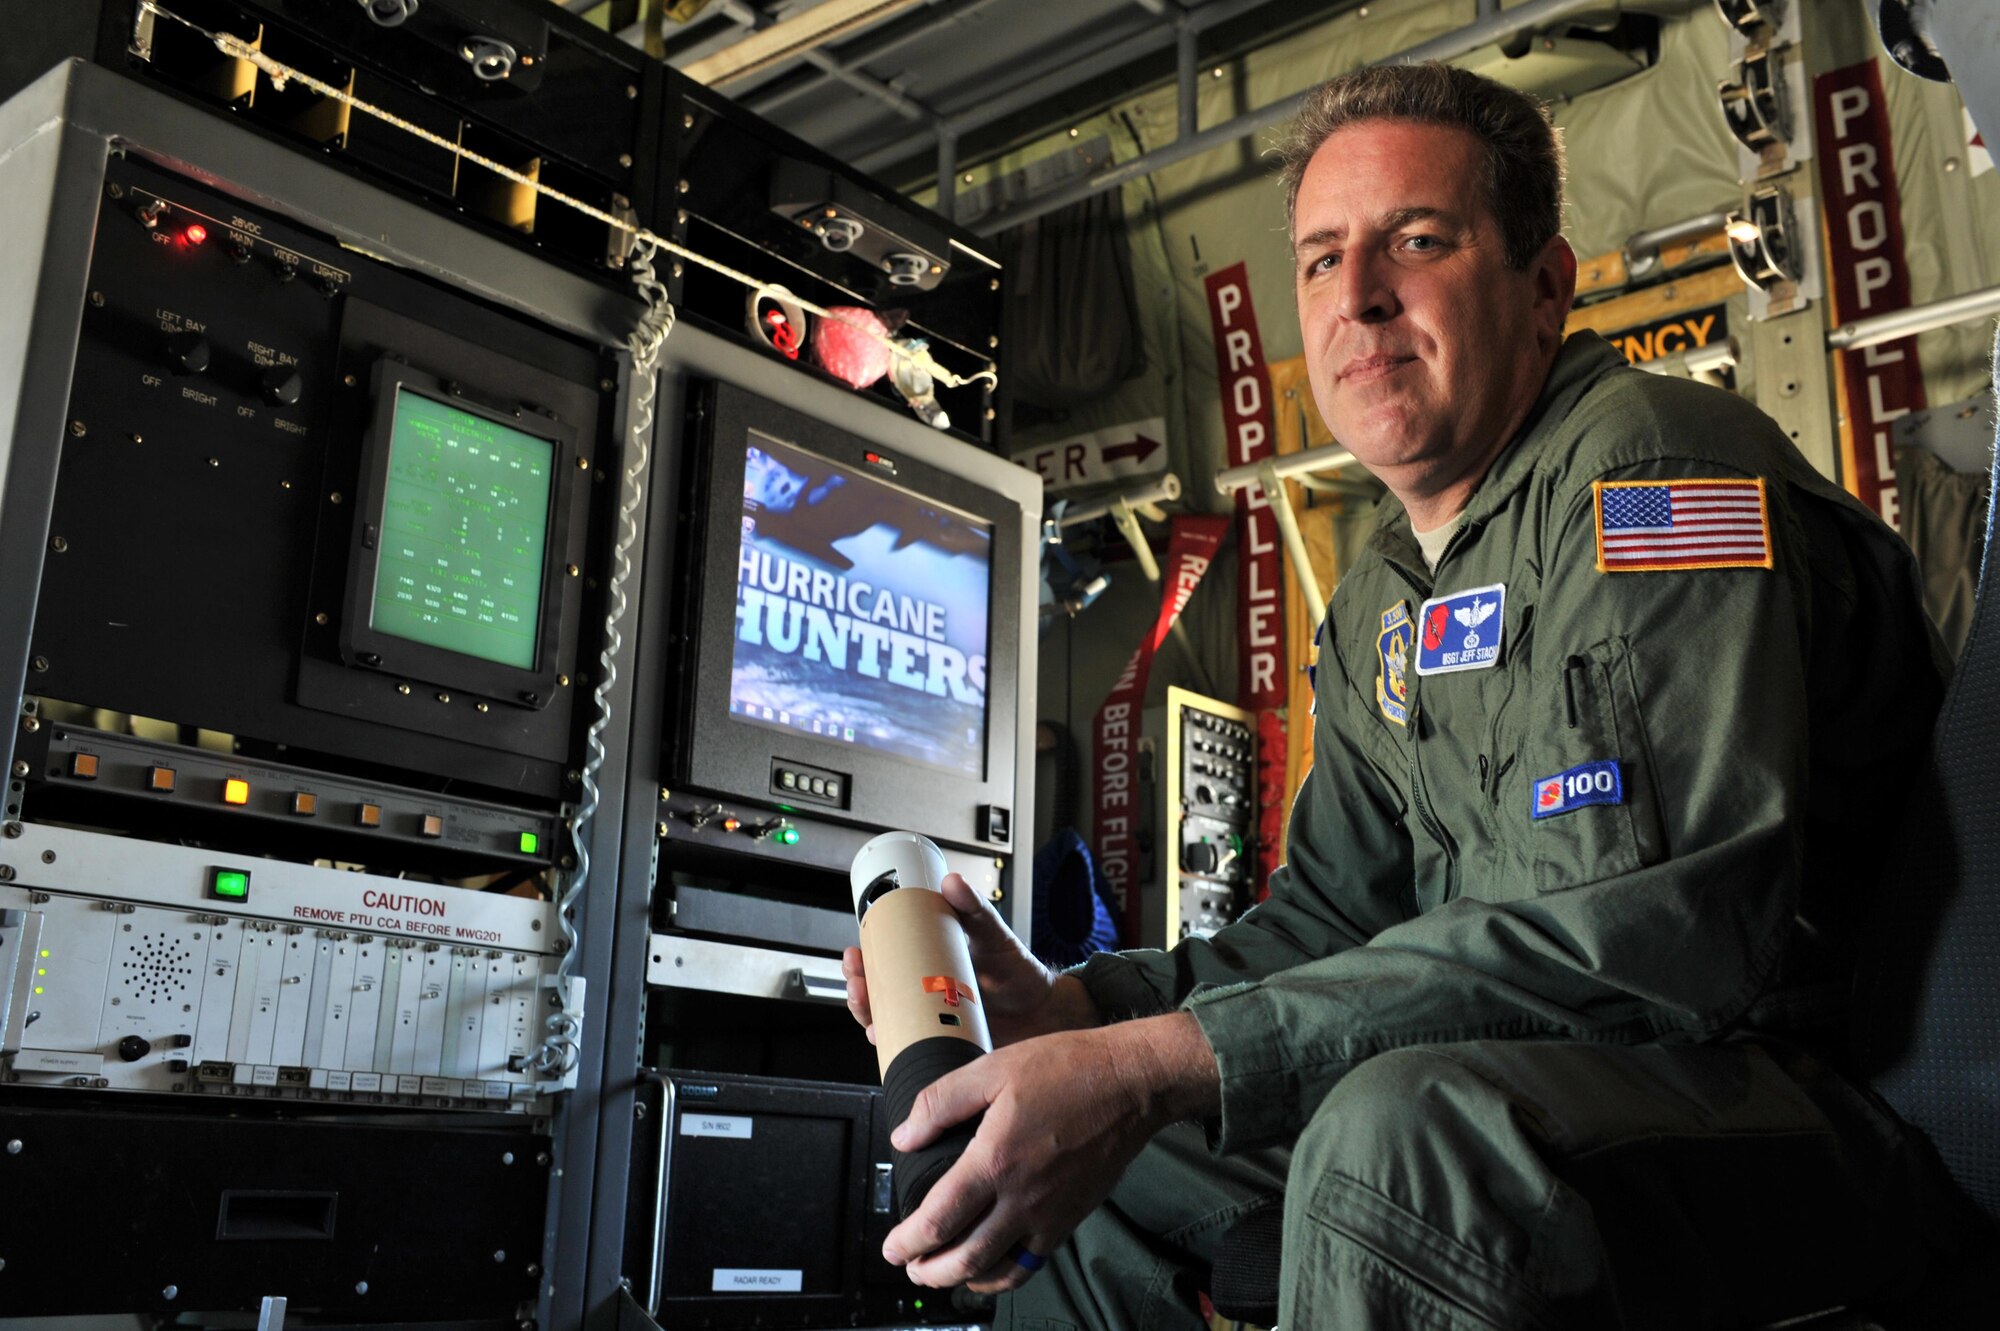 Master Sgt. Jeff Stack, 53rd Weather Reconnaissance Squadron loadmaster, holds a dropsonde while inside a WC-130J, Aug. 26, 2015, Keesler Air Force Base, Miss. Stack flew several missions tracking Hurricane Katrina before it devastated the Gulf Coast. The dropsonde is one of the primary tools the Hurricane Hunters use to accurately track and collect data on tropical storms and hurricanes. (U.S. Air Force photo by Tech. Sgt. Greg C. Biondo)